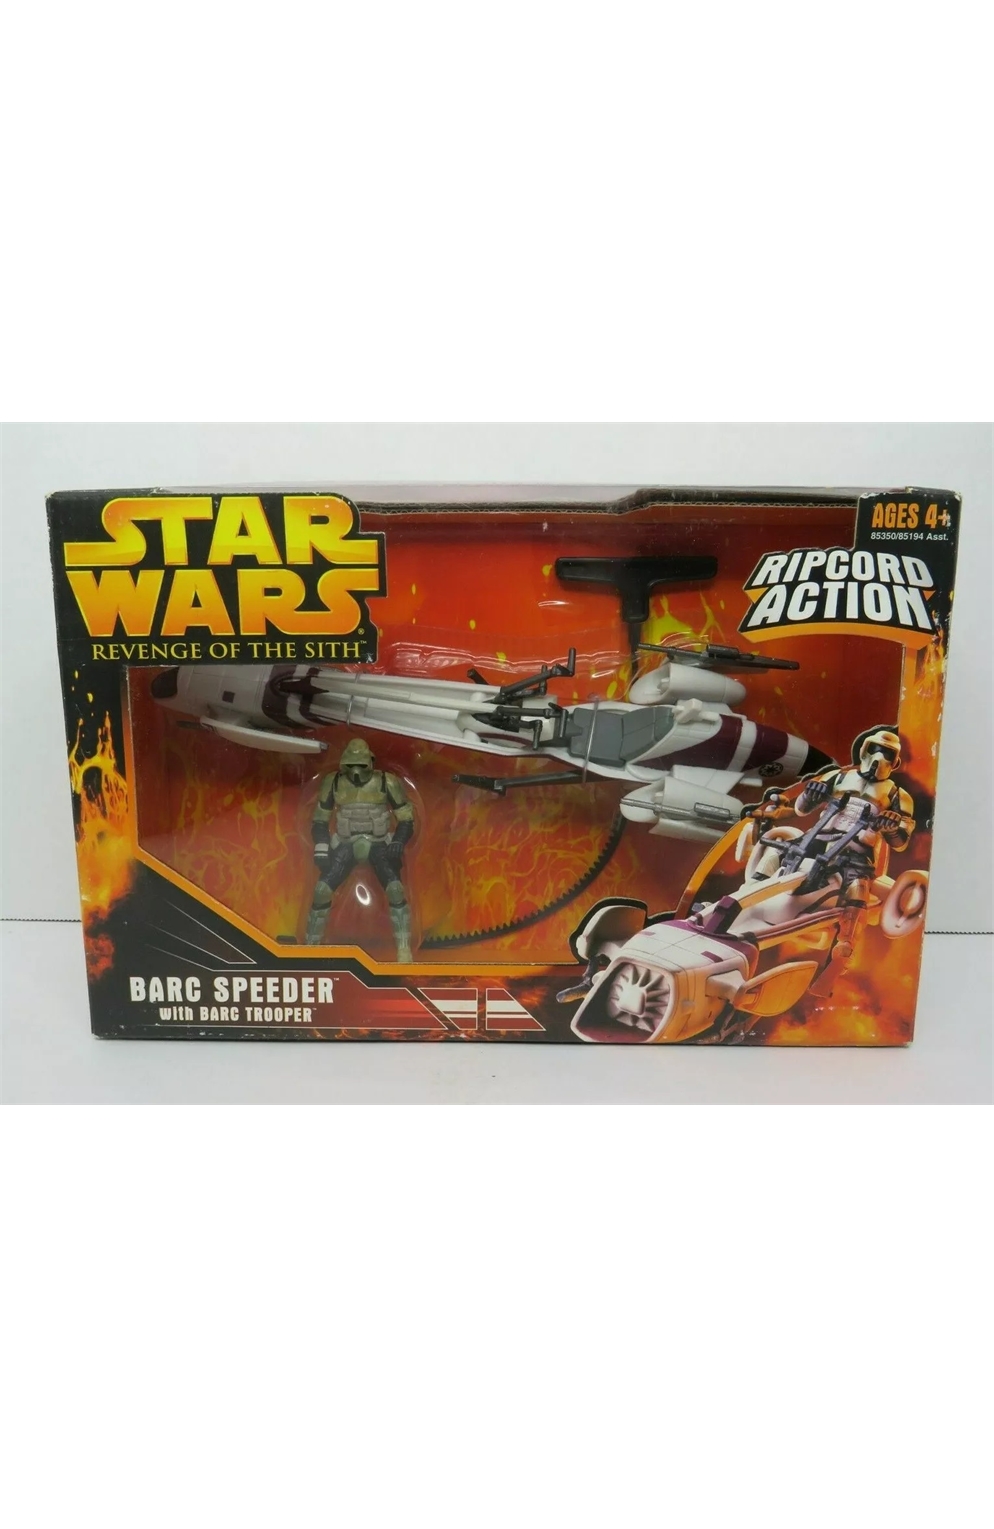 Star Wars Revenge of The Sith Barc Speeder With Barc Trooper